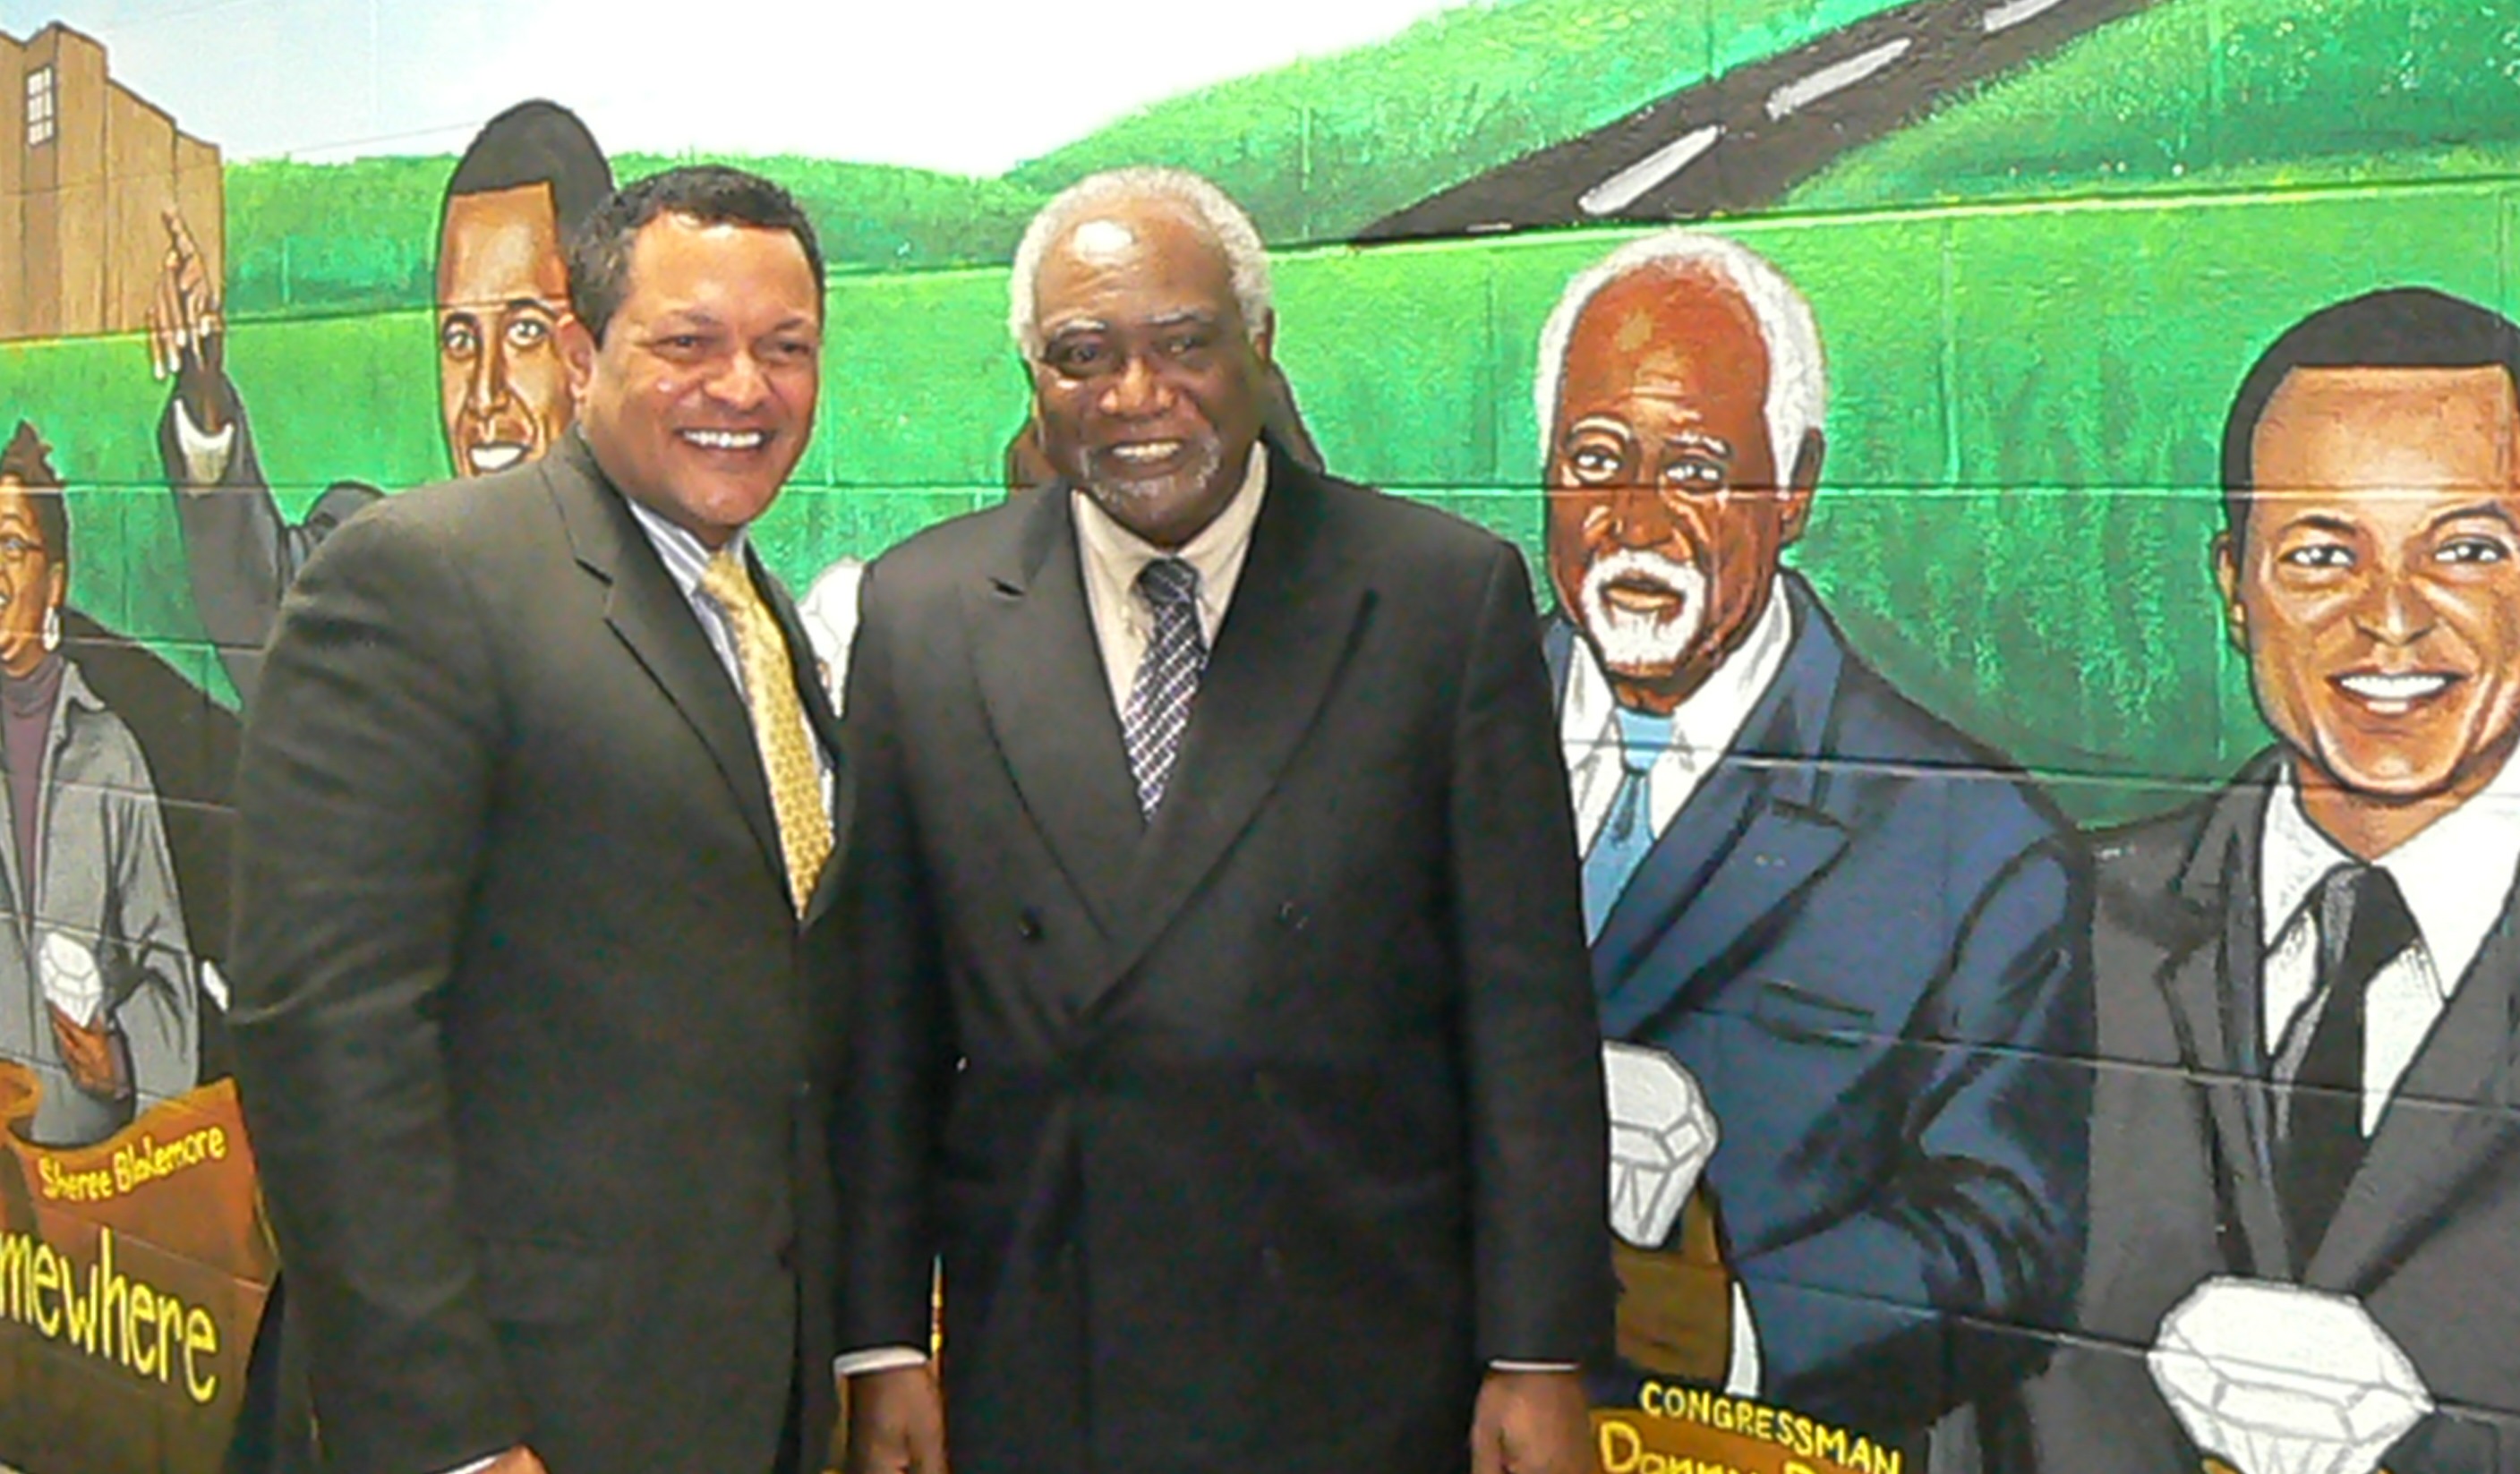 Cong. Danny Davis and Kenneth Morris stand beside their images painted in a mural at Frederick Douglass High School.